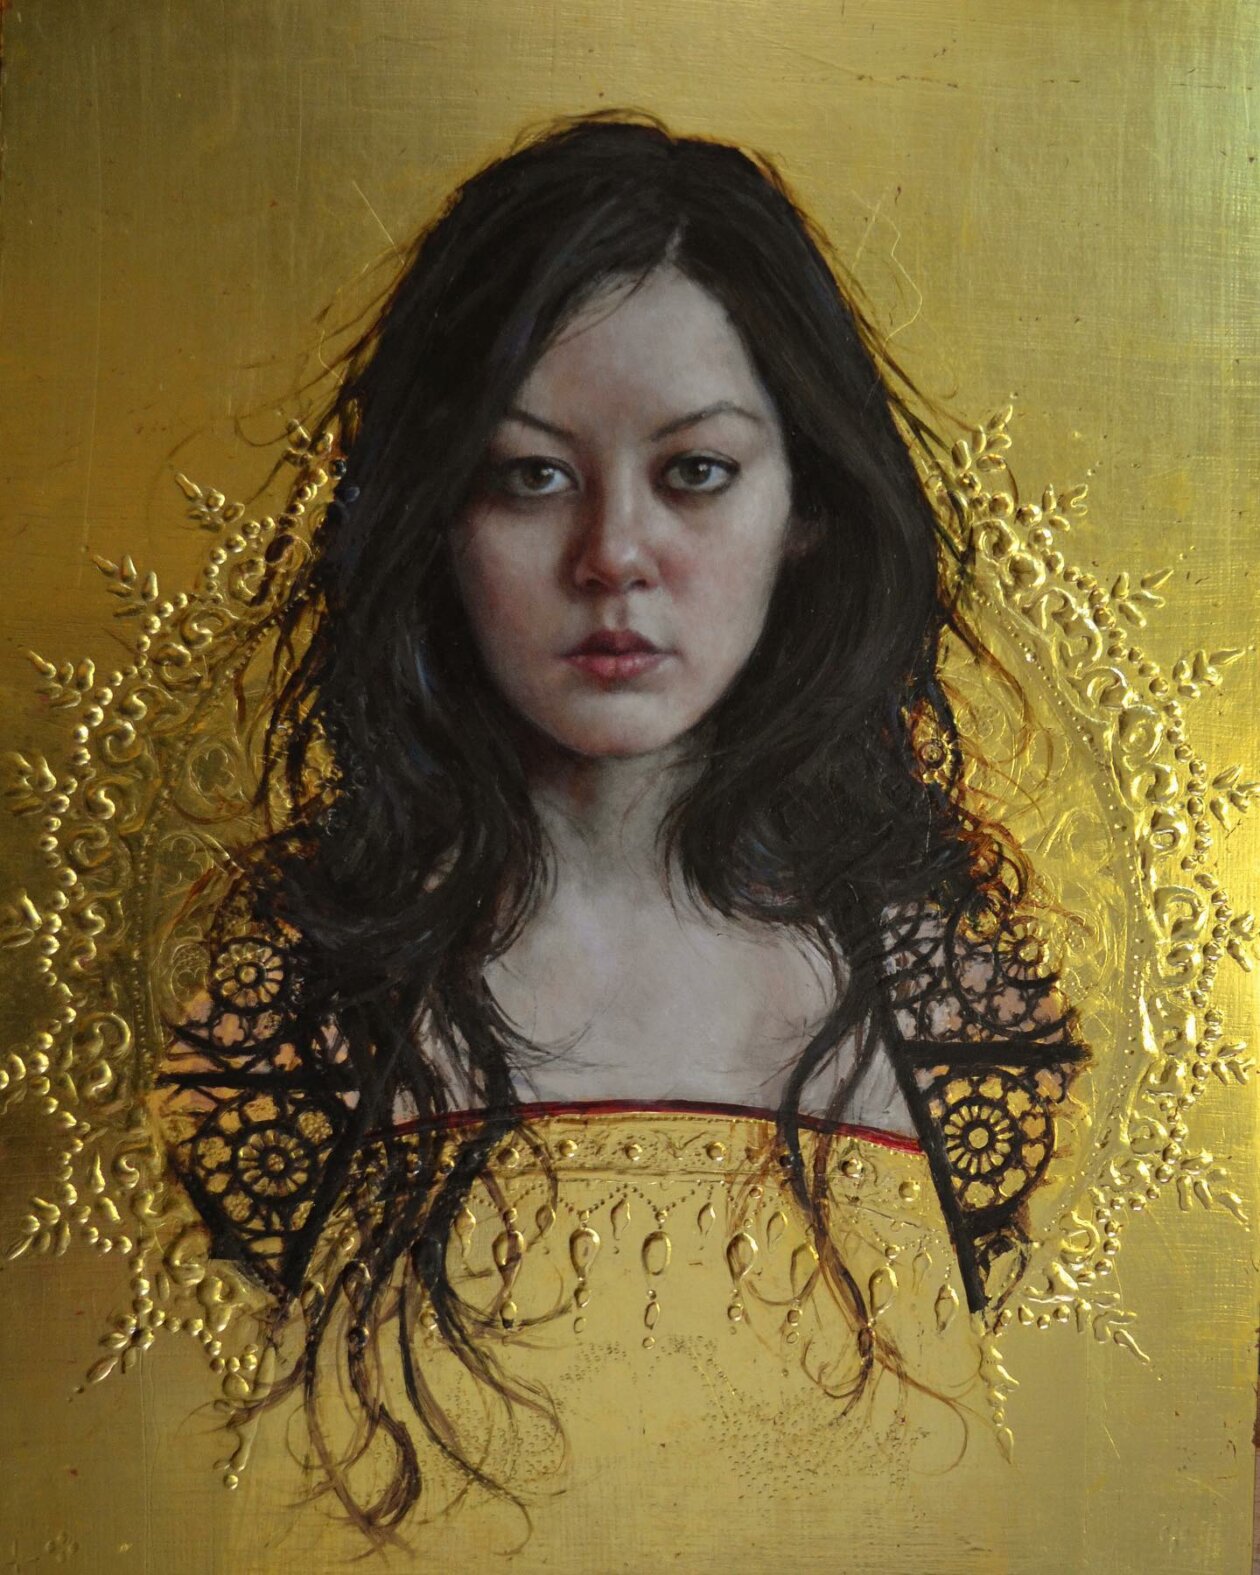 Realistic Figurative Paintings With Gold Ornaments By Stephanie Rew (2)